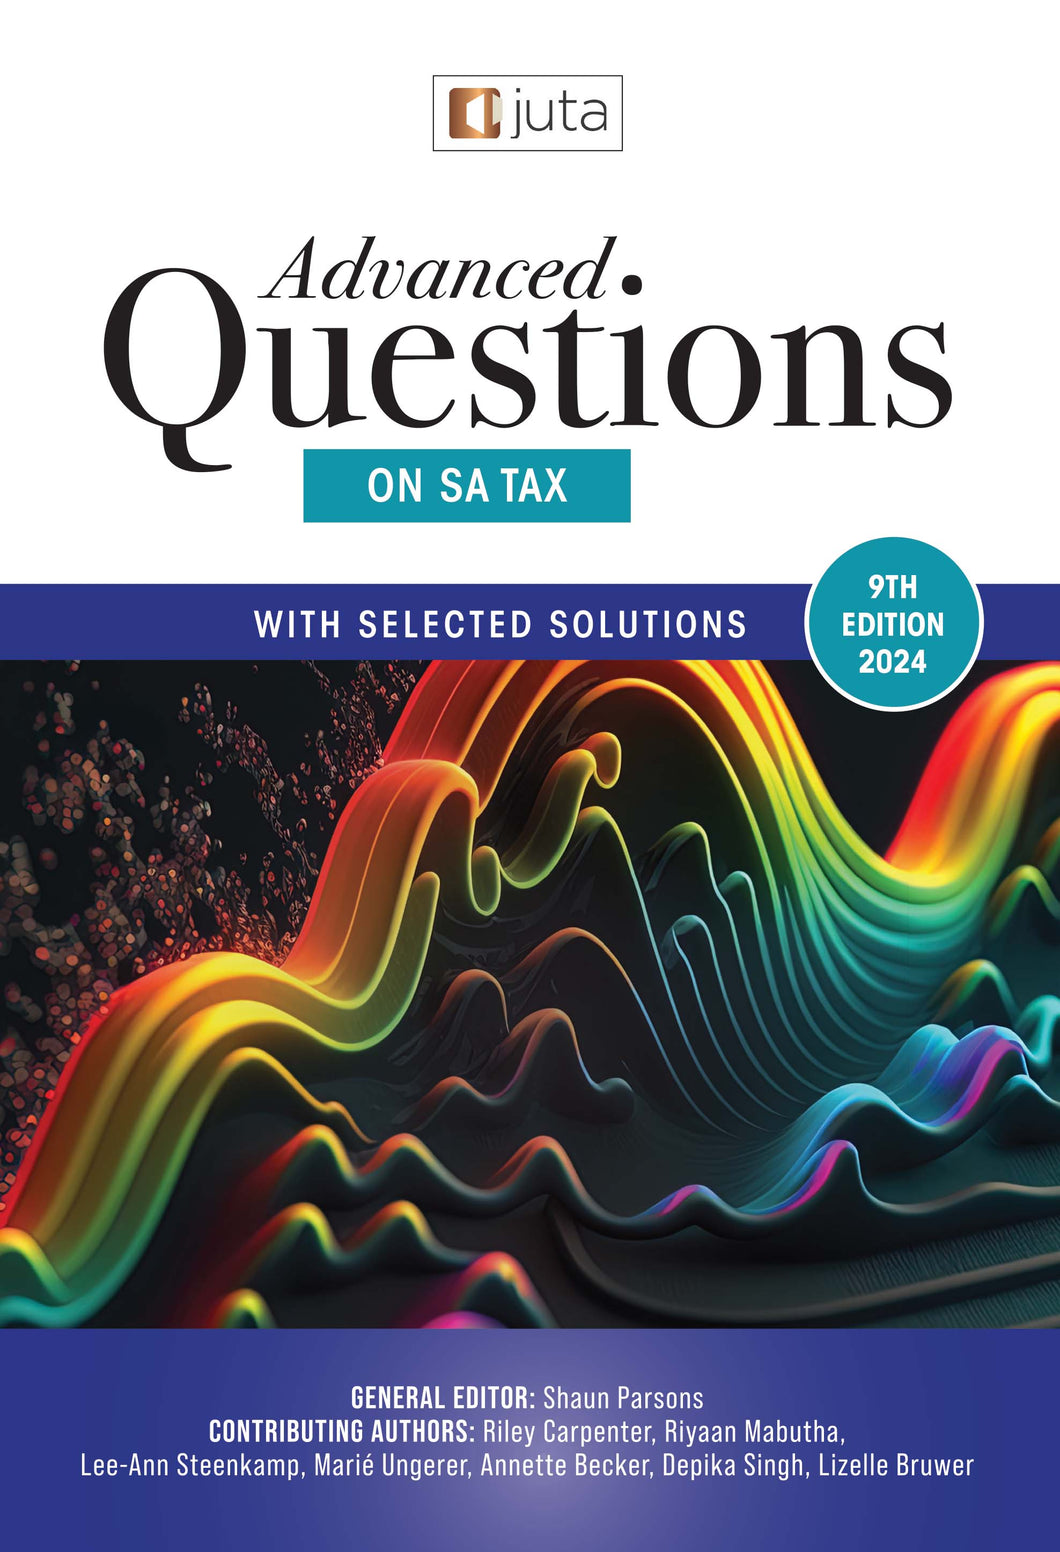 Advanced Questions on SA Tax, 9th Ed, 2024 (Not in Stock yet. Please see description)